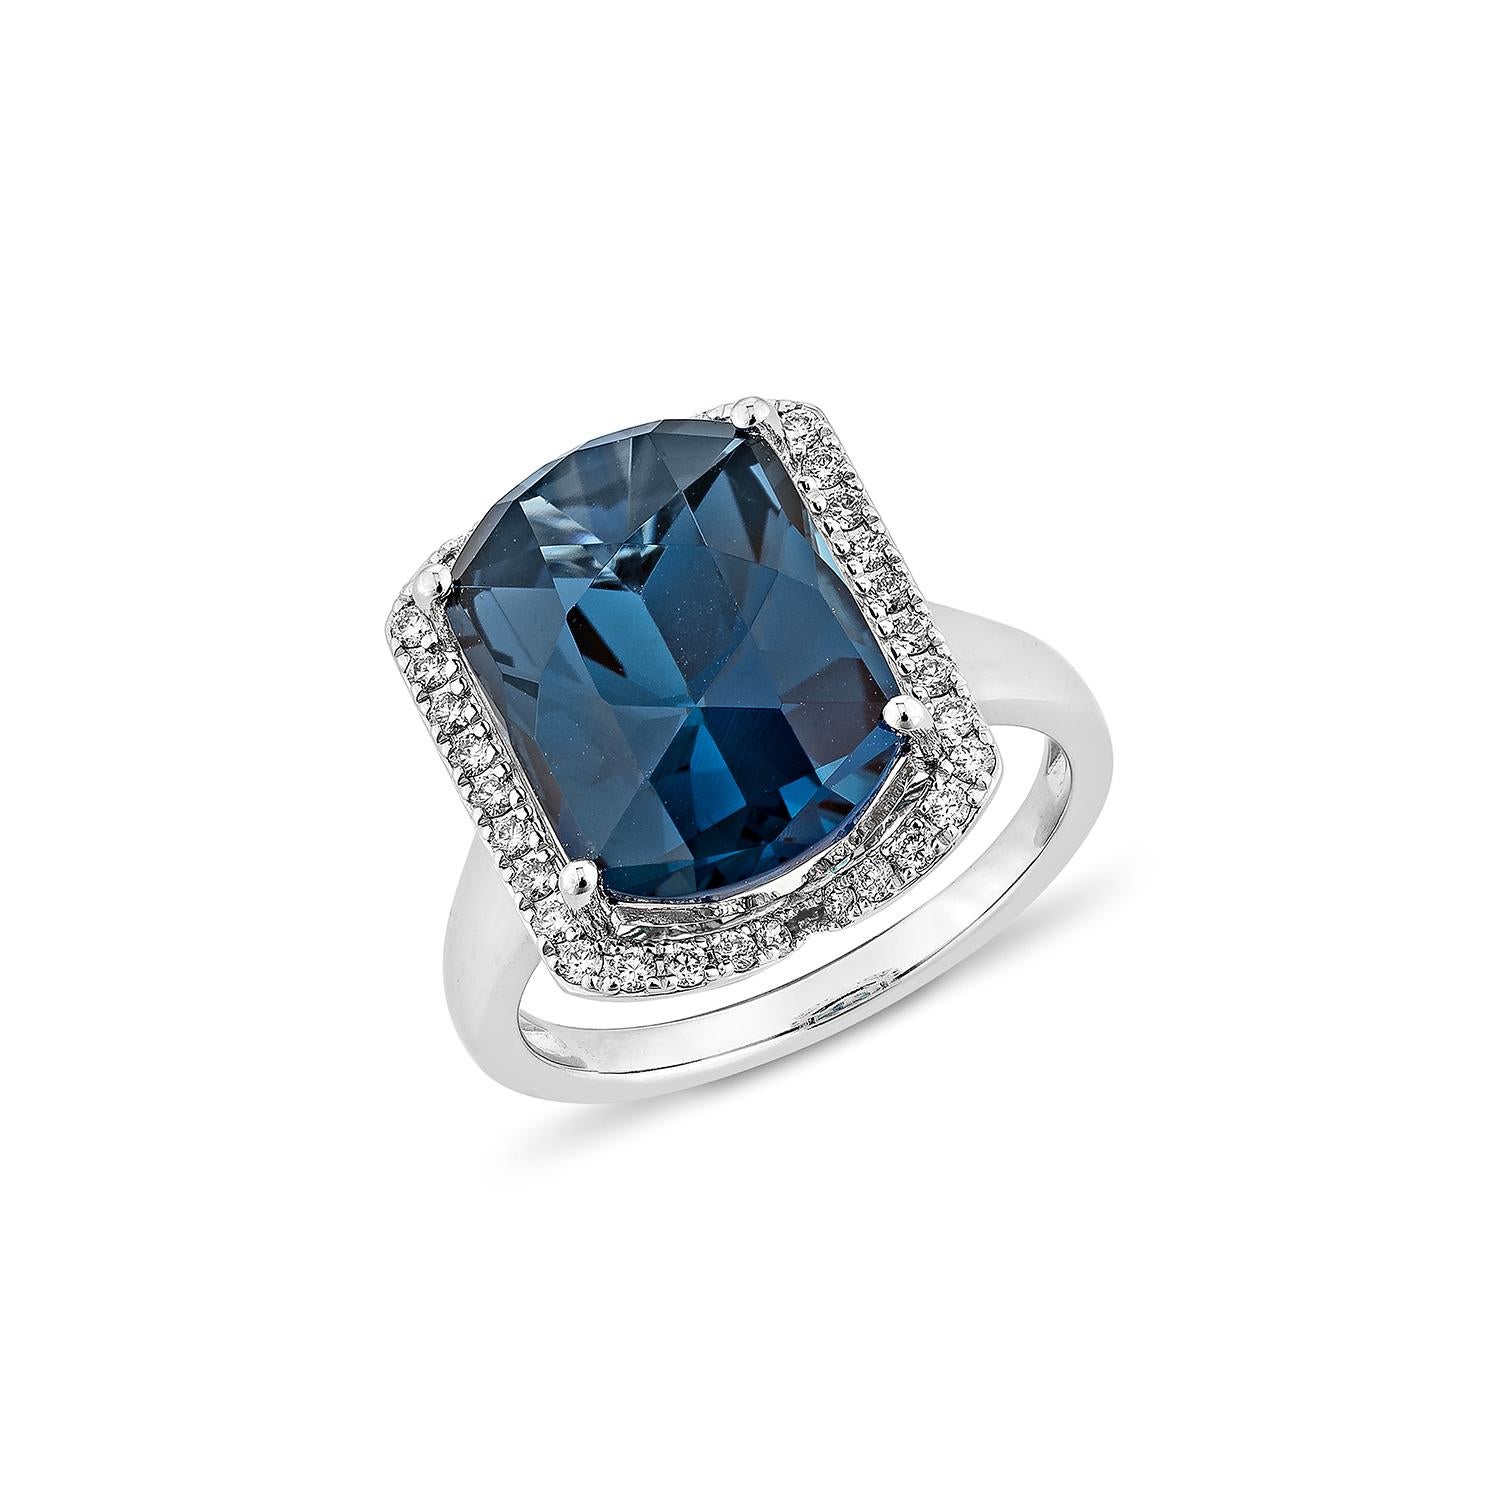 Contemporary 8.04 Carat London Blue Topaz Fancy Ring in 18Karat White Gold with Diamond. For Sale